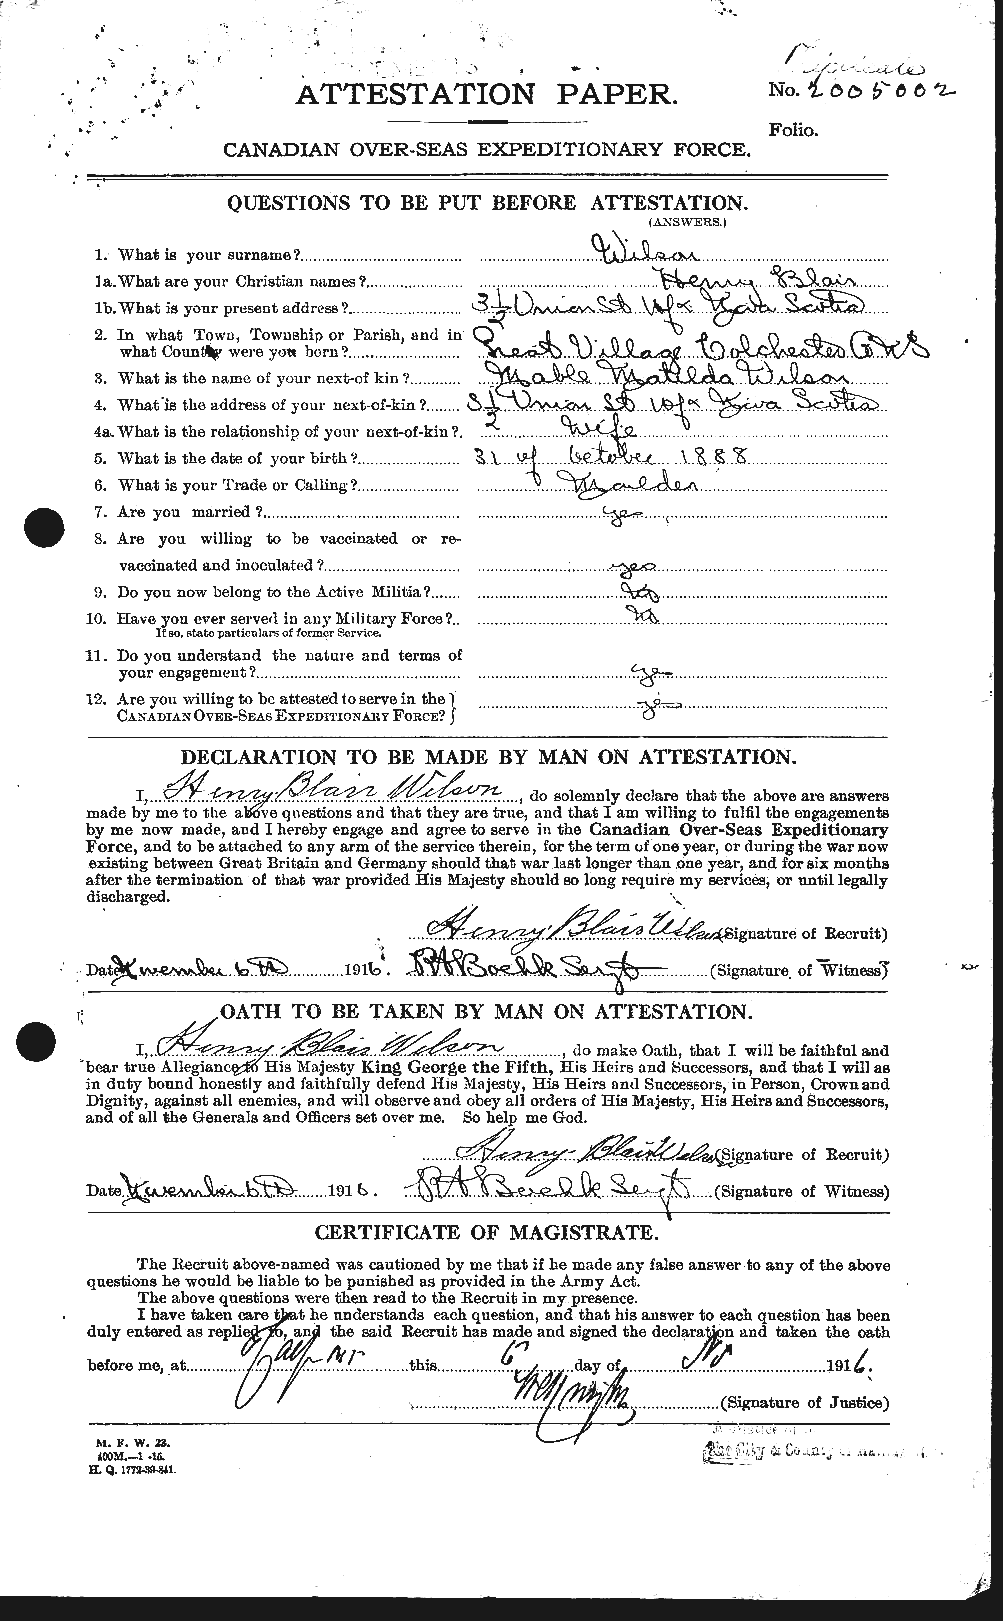 Personnel Records of the First World War - CEF 679517a